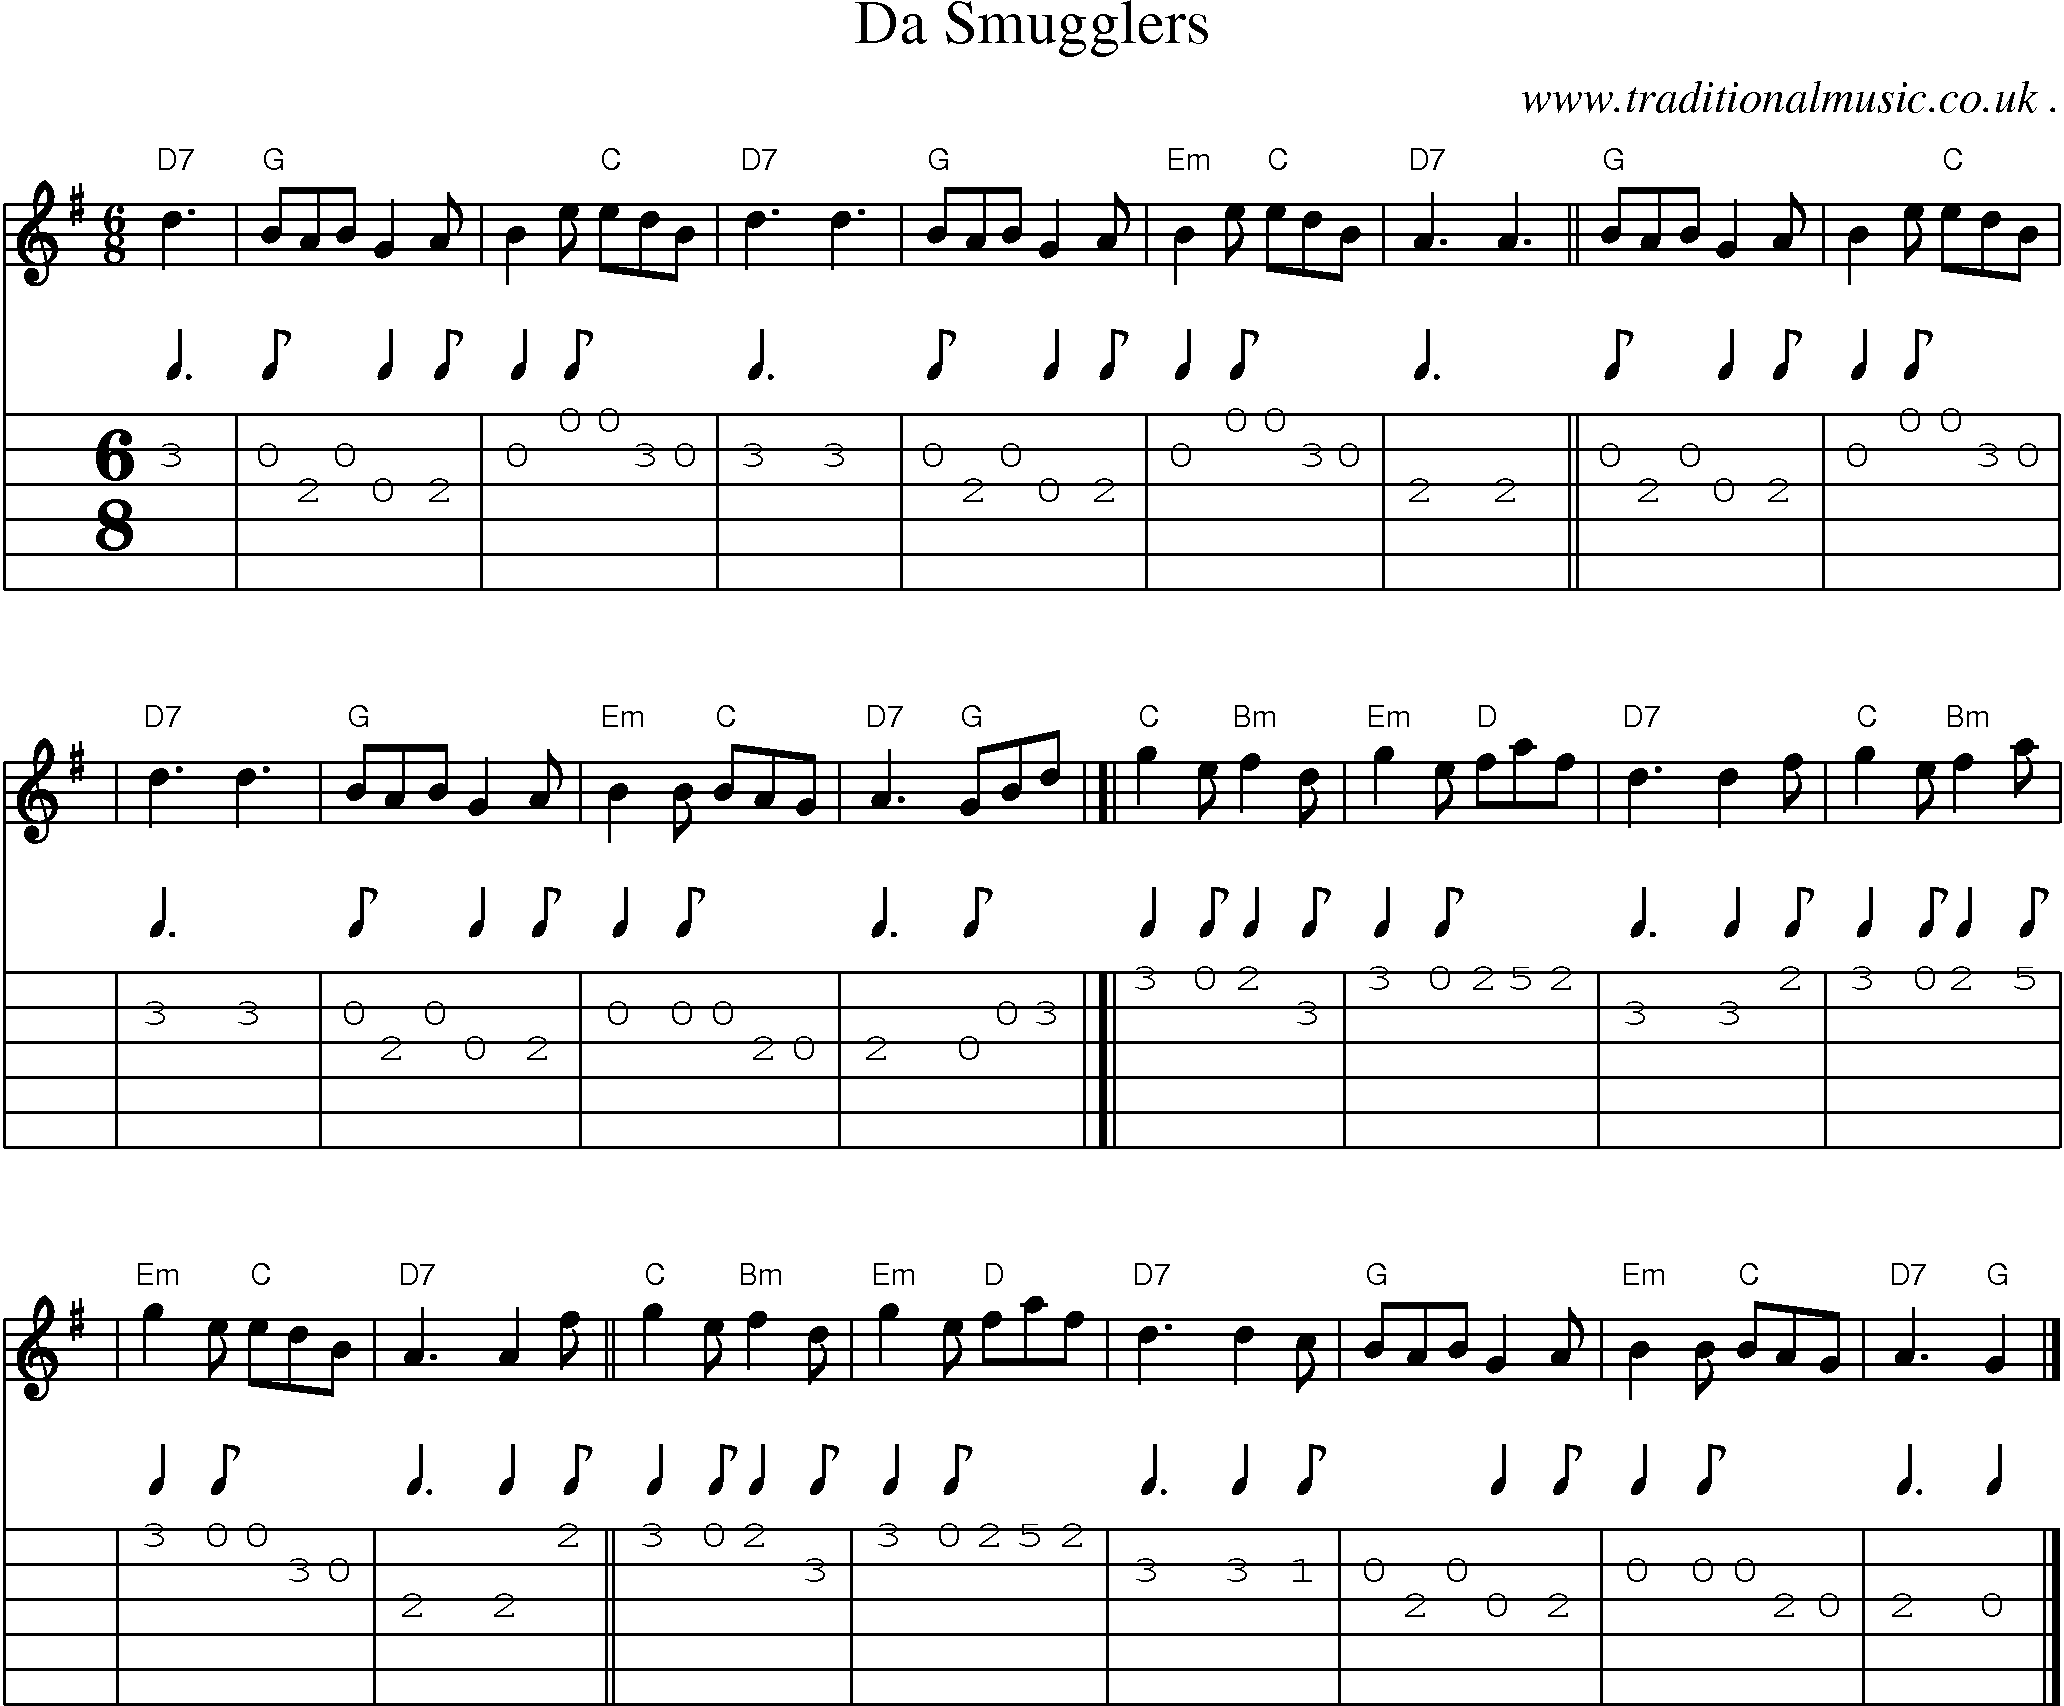 Sheet-music  score, Chords and Guitar Tabs for Da Smugglers